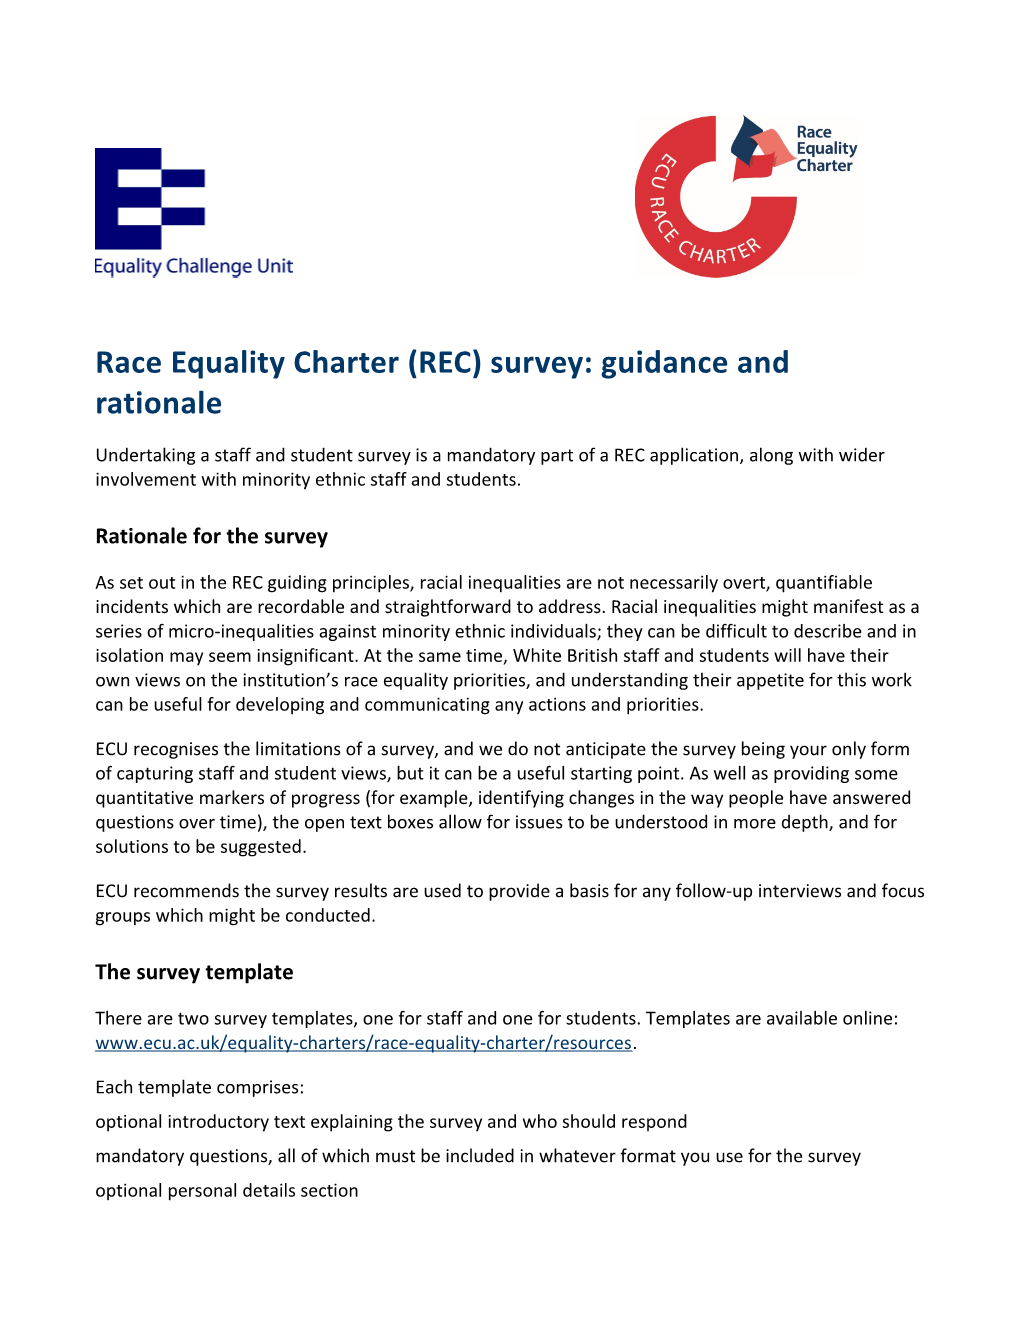 Race Equality Charter (REC) Survey: Guidance and Rationale